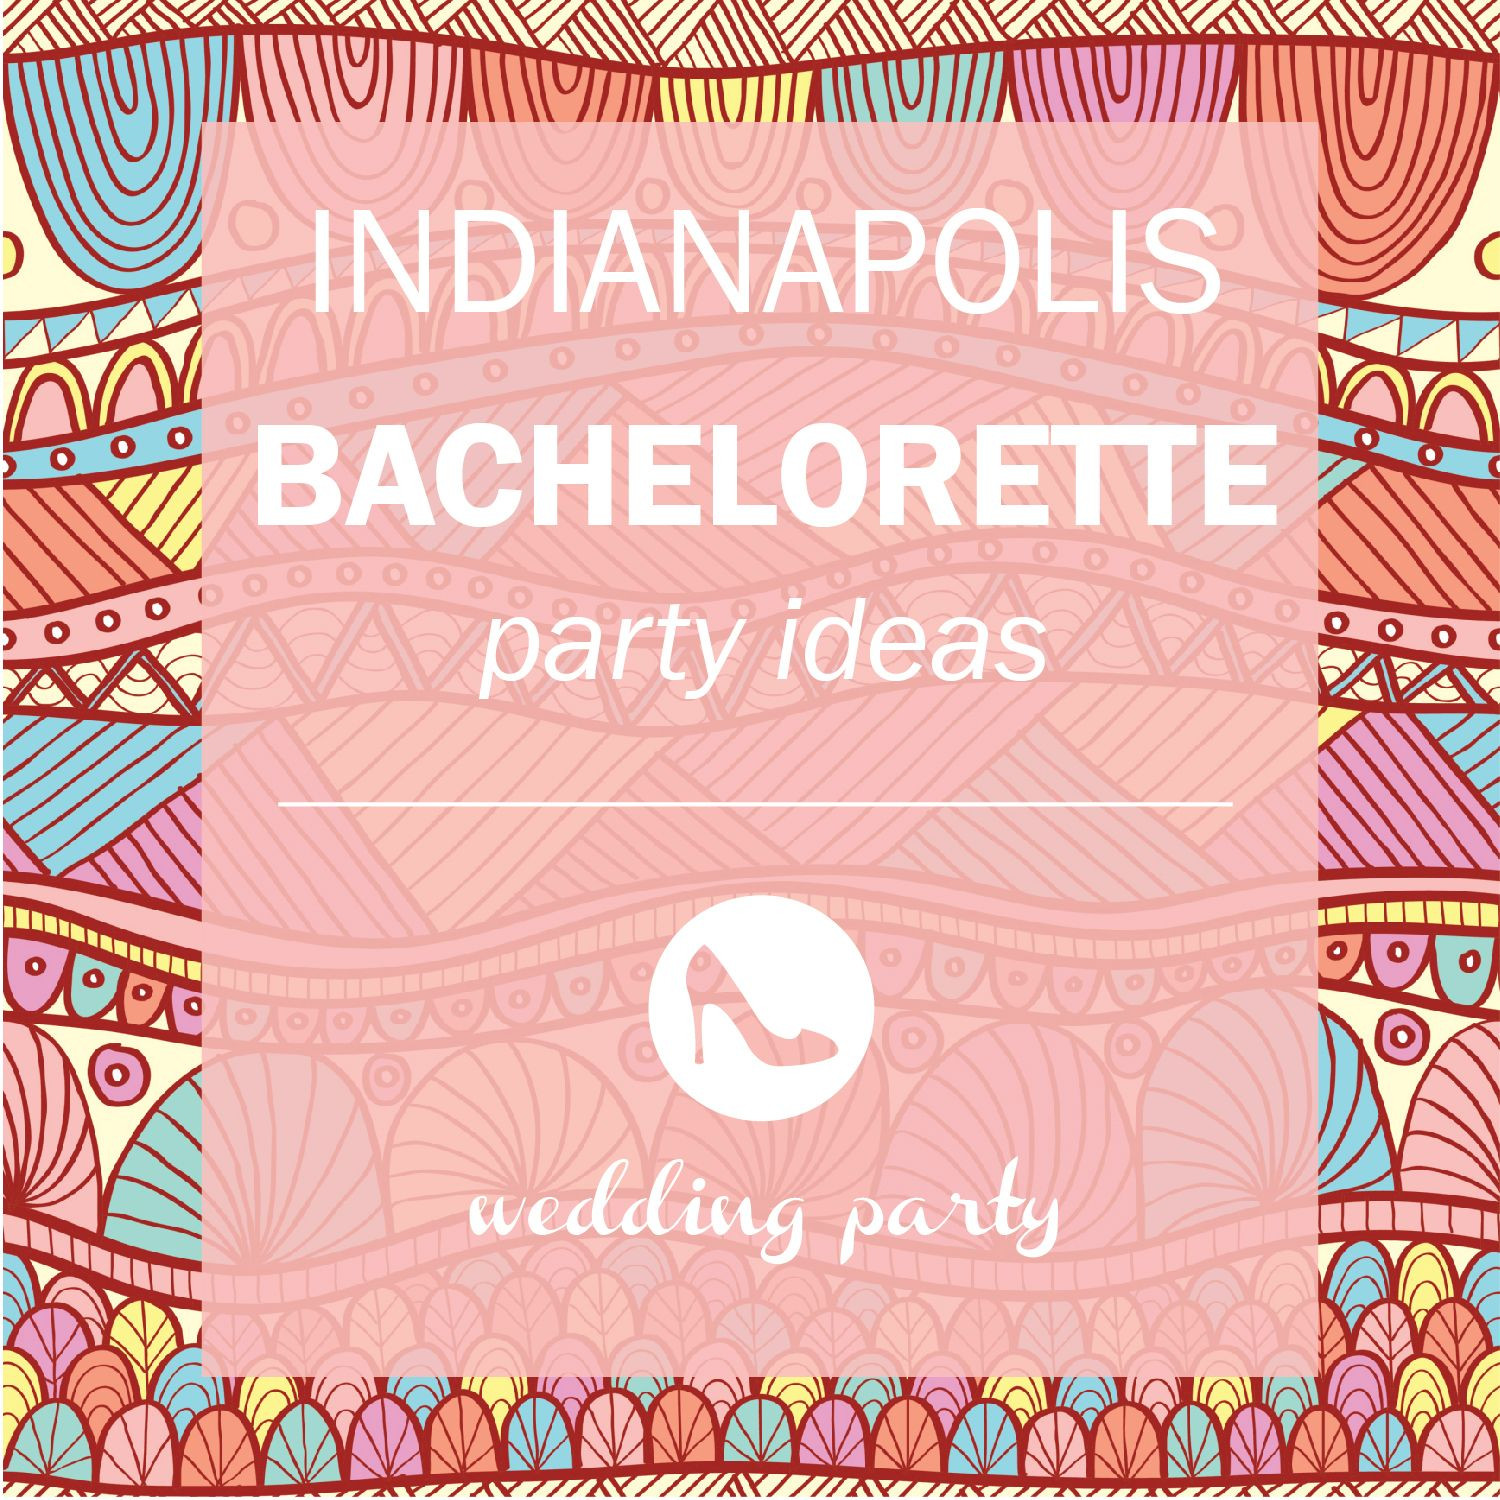 Bachelorette Party Ideas In Indianapolis
 8 Ways to Party in Indianapolis for your Bachelorette